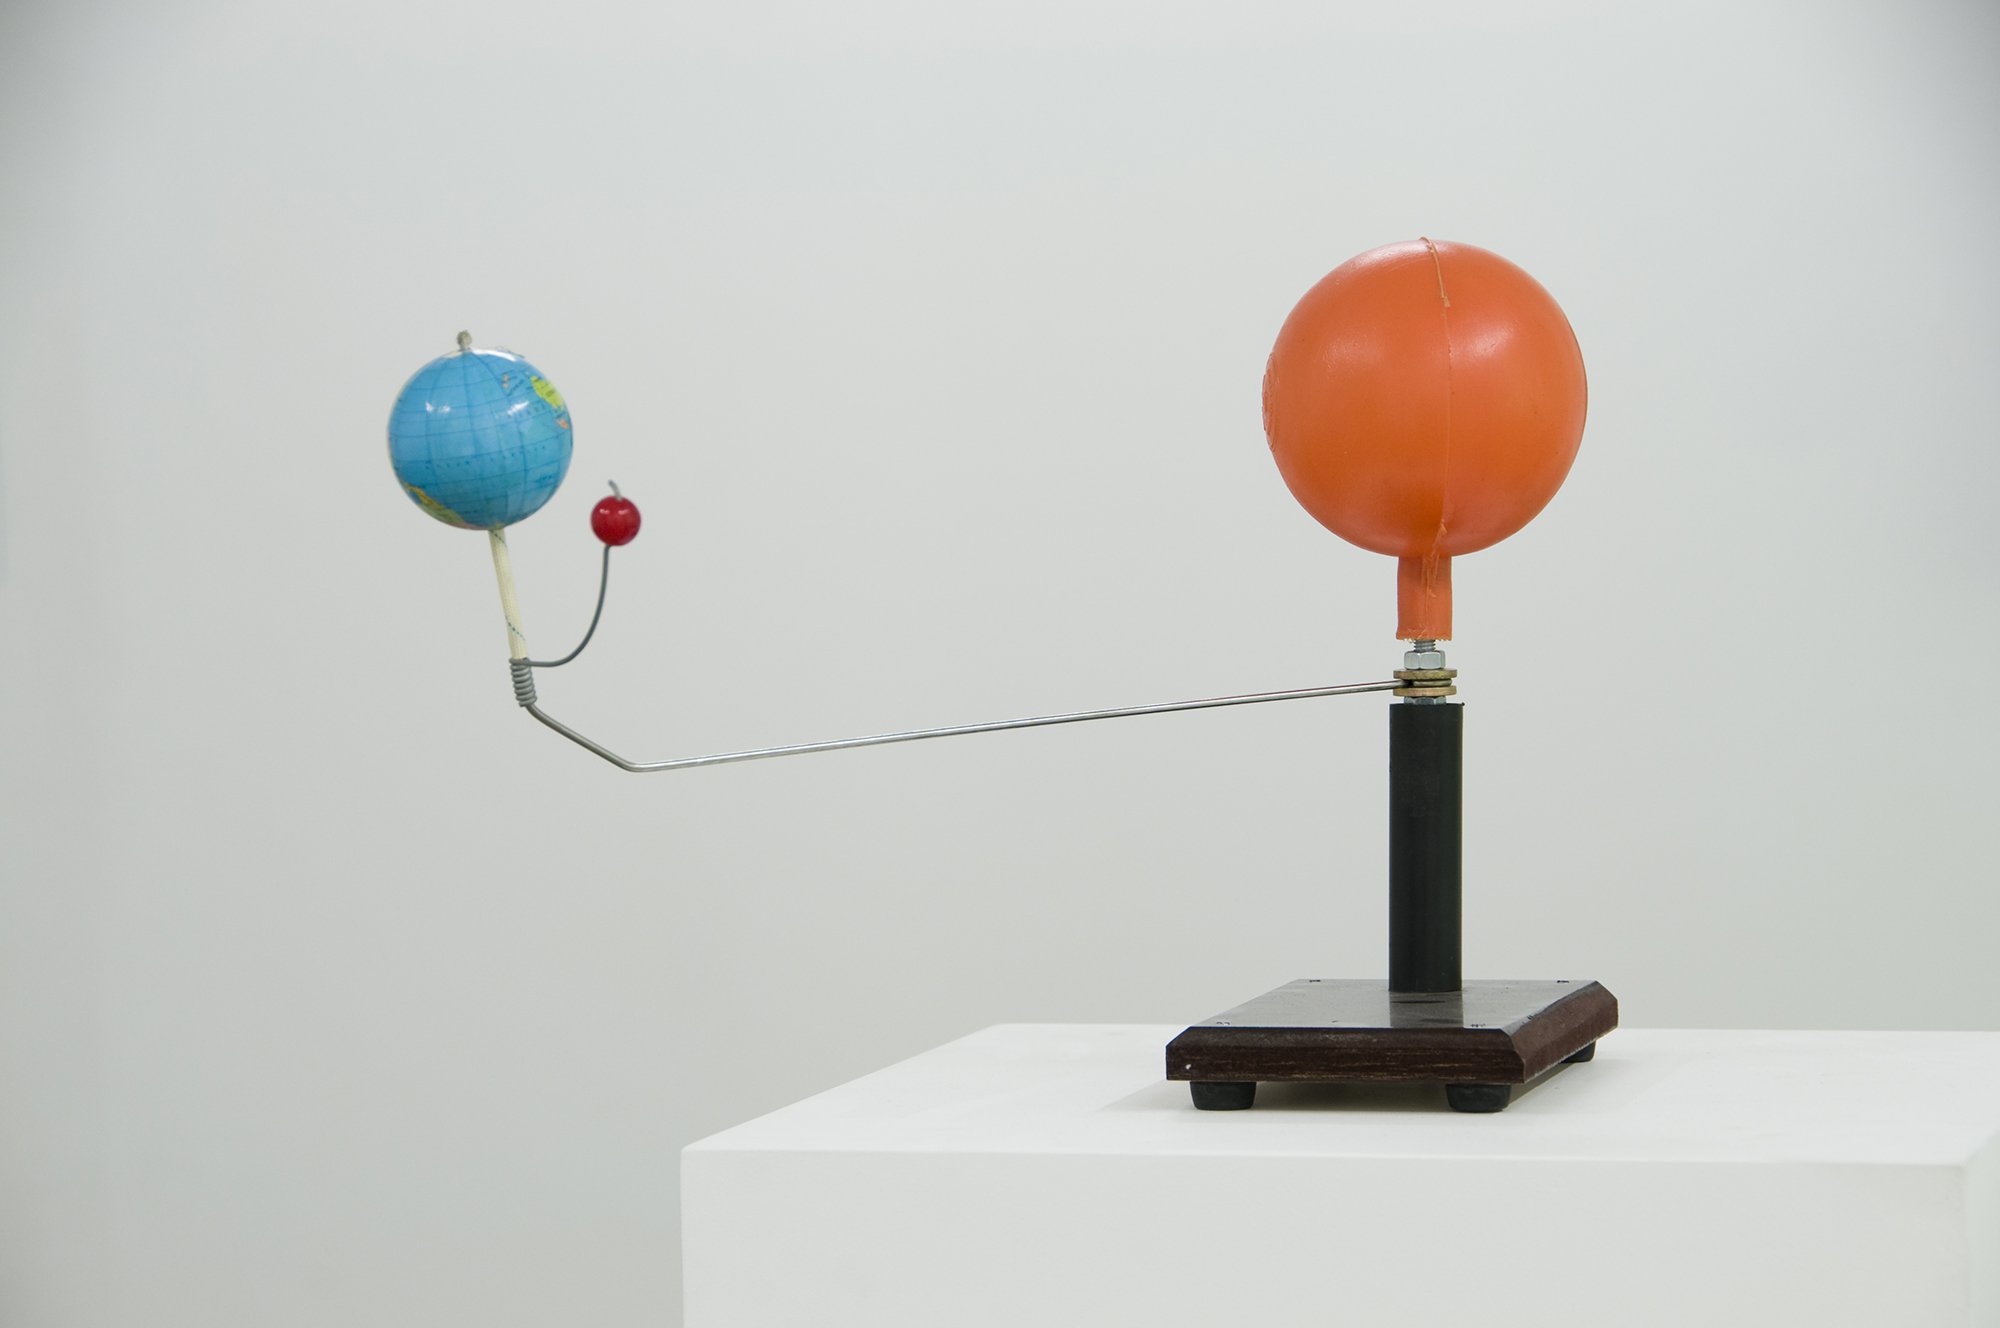 Banu Cennetoğlu, Earth, Moon and Sun, moving sculpture bought from an artist-scientist in Amman, 2011